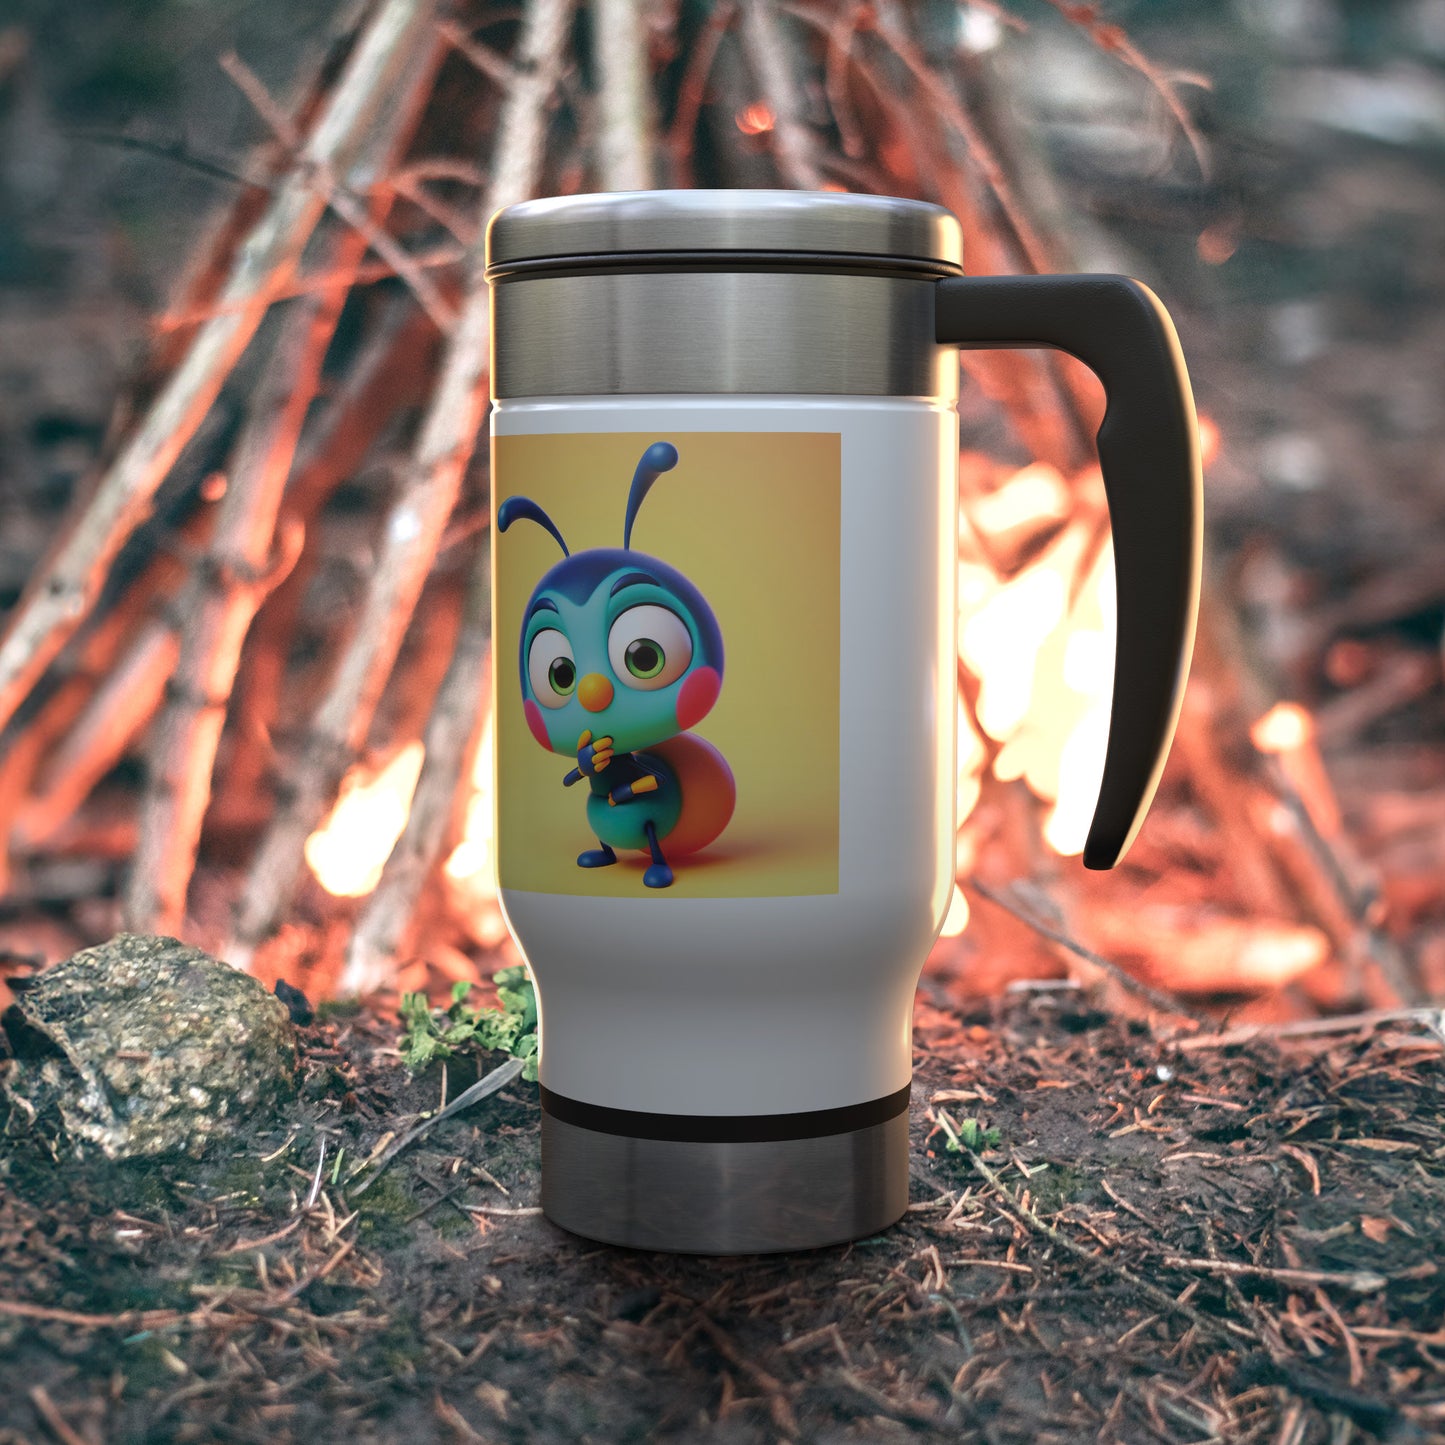 Cute & Adorable Insects - 14oz Travel Mug - Ants #2